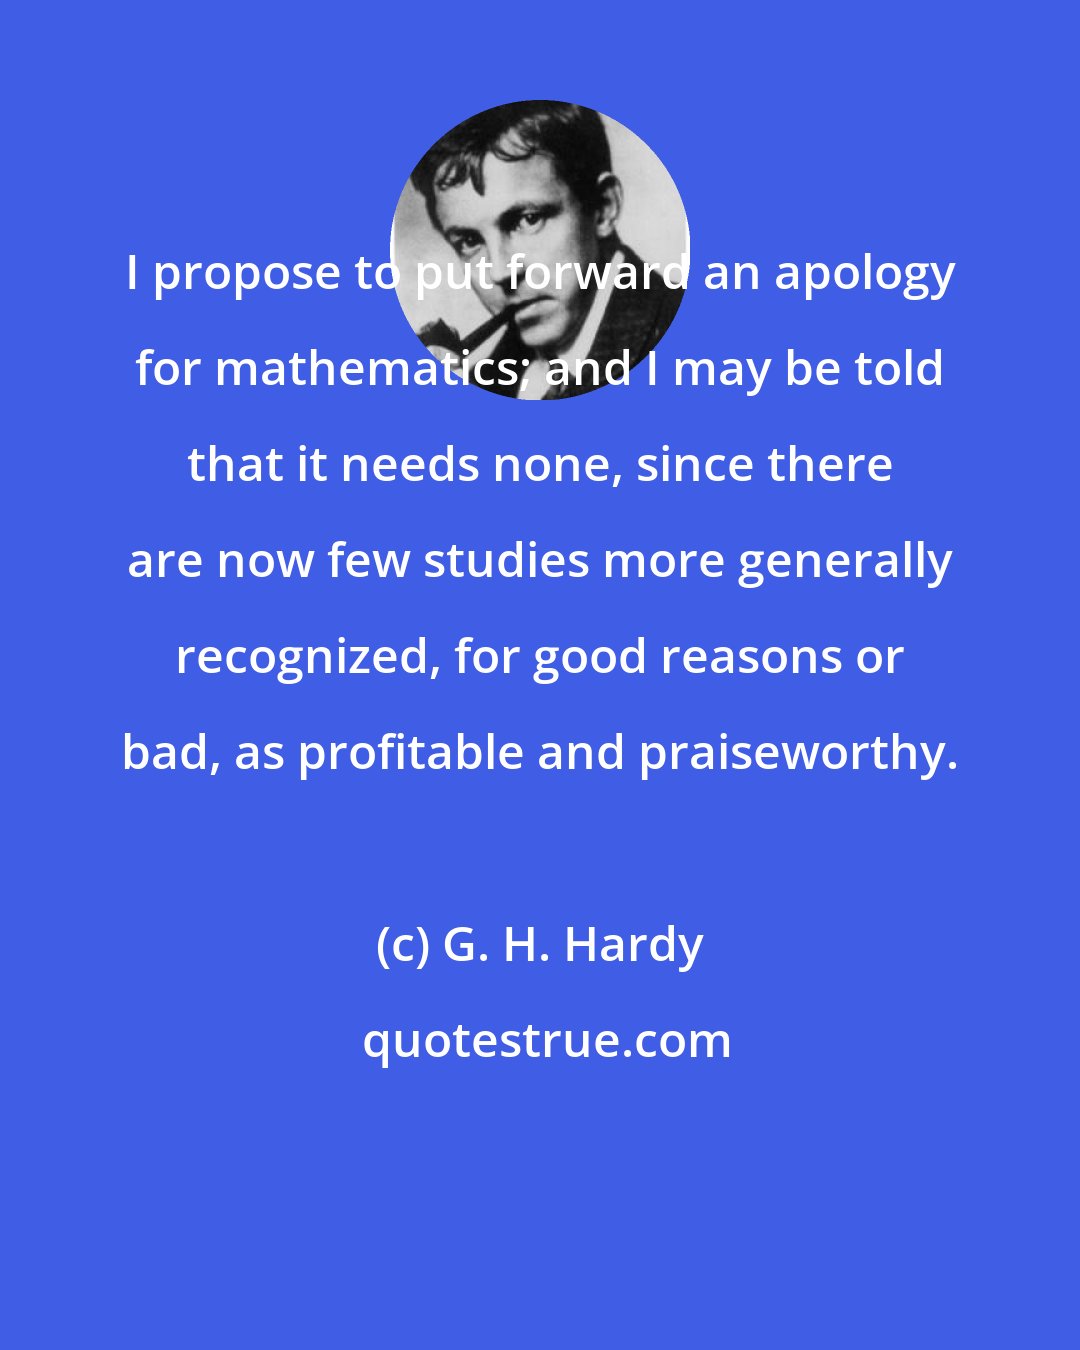 G. H. Hardy: I propose to put forward an apology for mathematics; and I may be told that it needs none, since there are now few studies more generally recognized, for good reasons or bad, as profitable and praiseworthy.